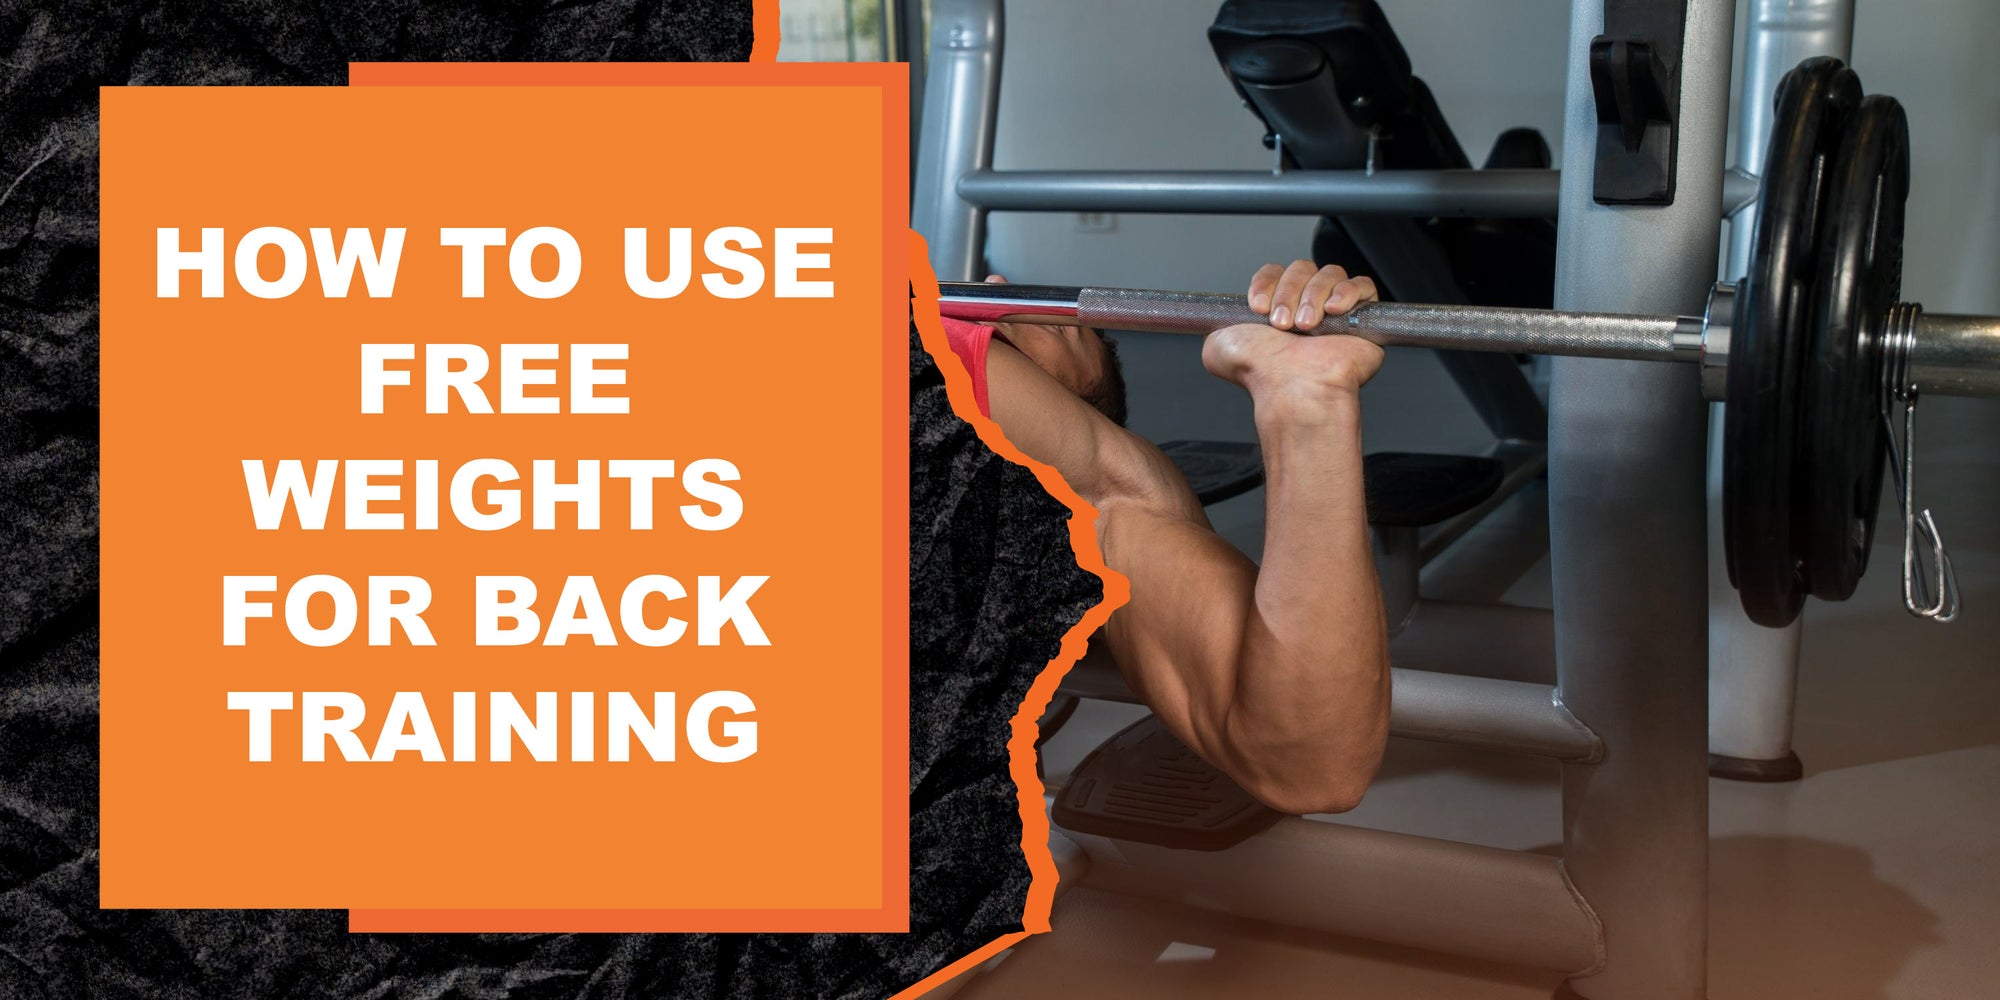 How to Use Free Weights for Back Training